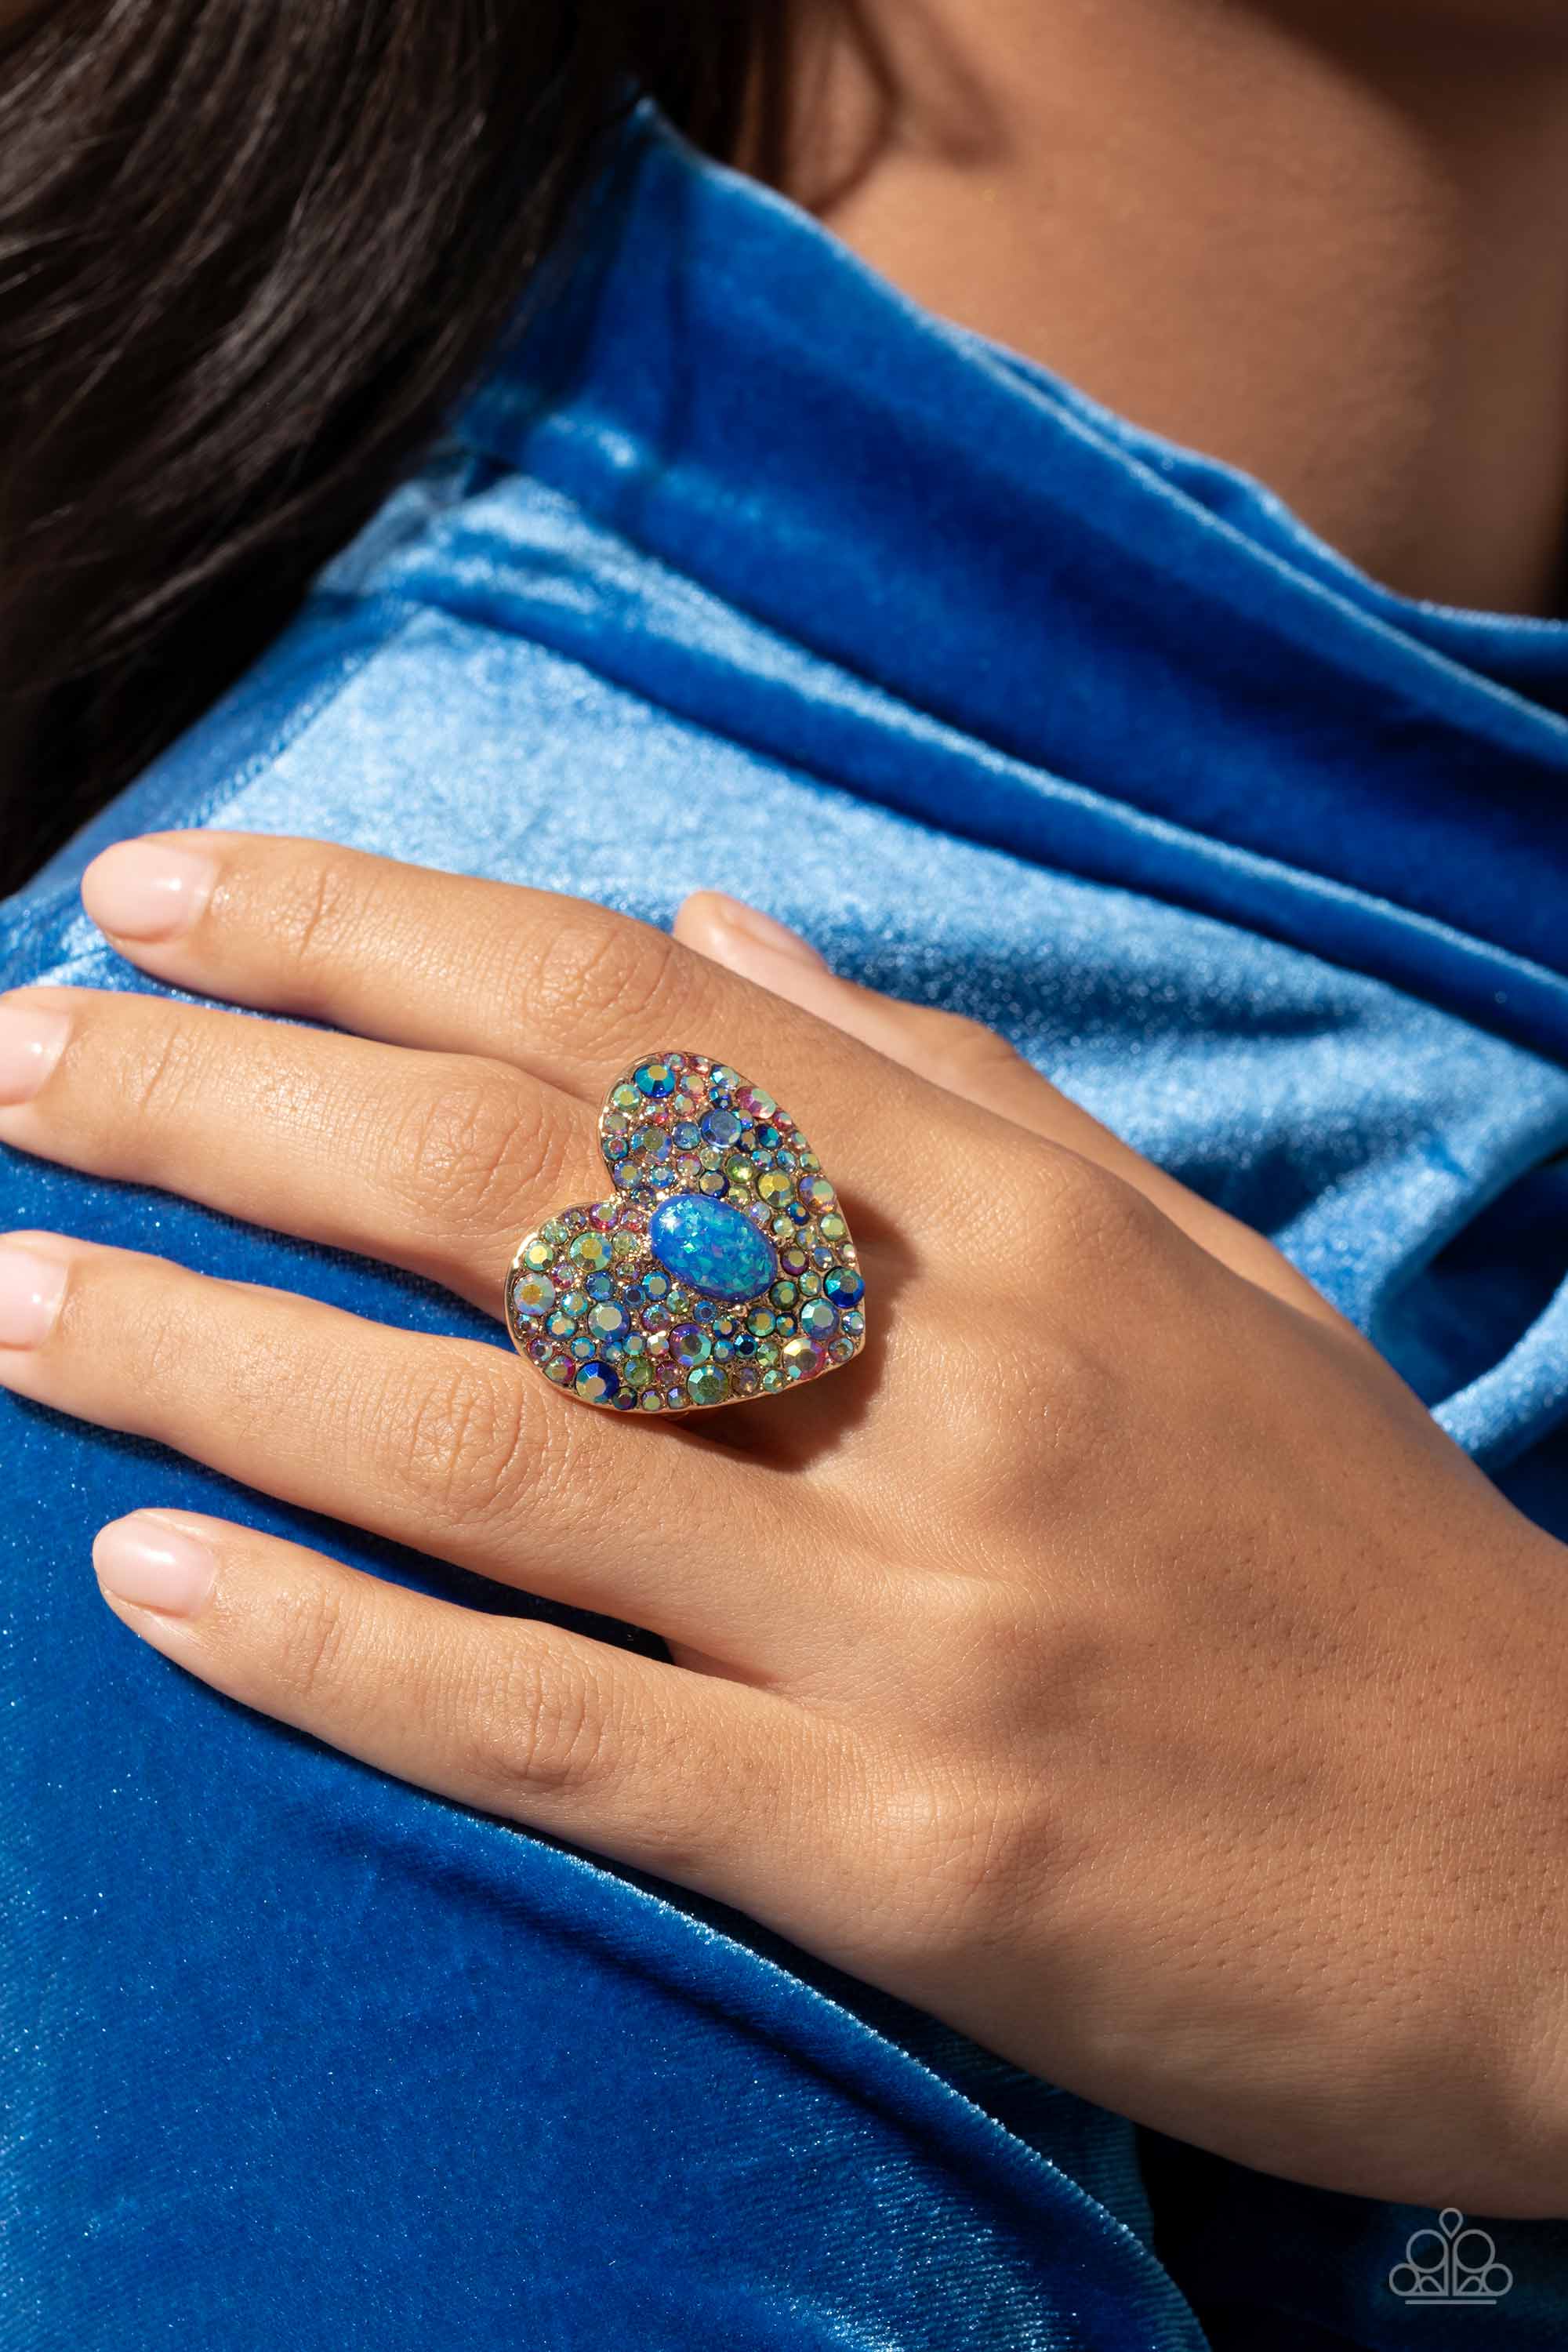 Bejeweled Beau Blue & Iridescent Heart Ring - Paparazzi Accessories- lightbox - CarasShop.com - $5 Jewelry by Cara Jewels